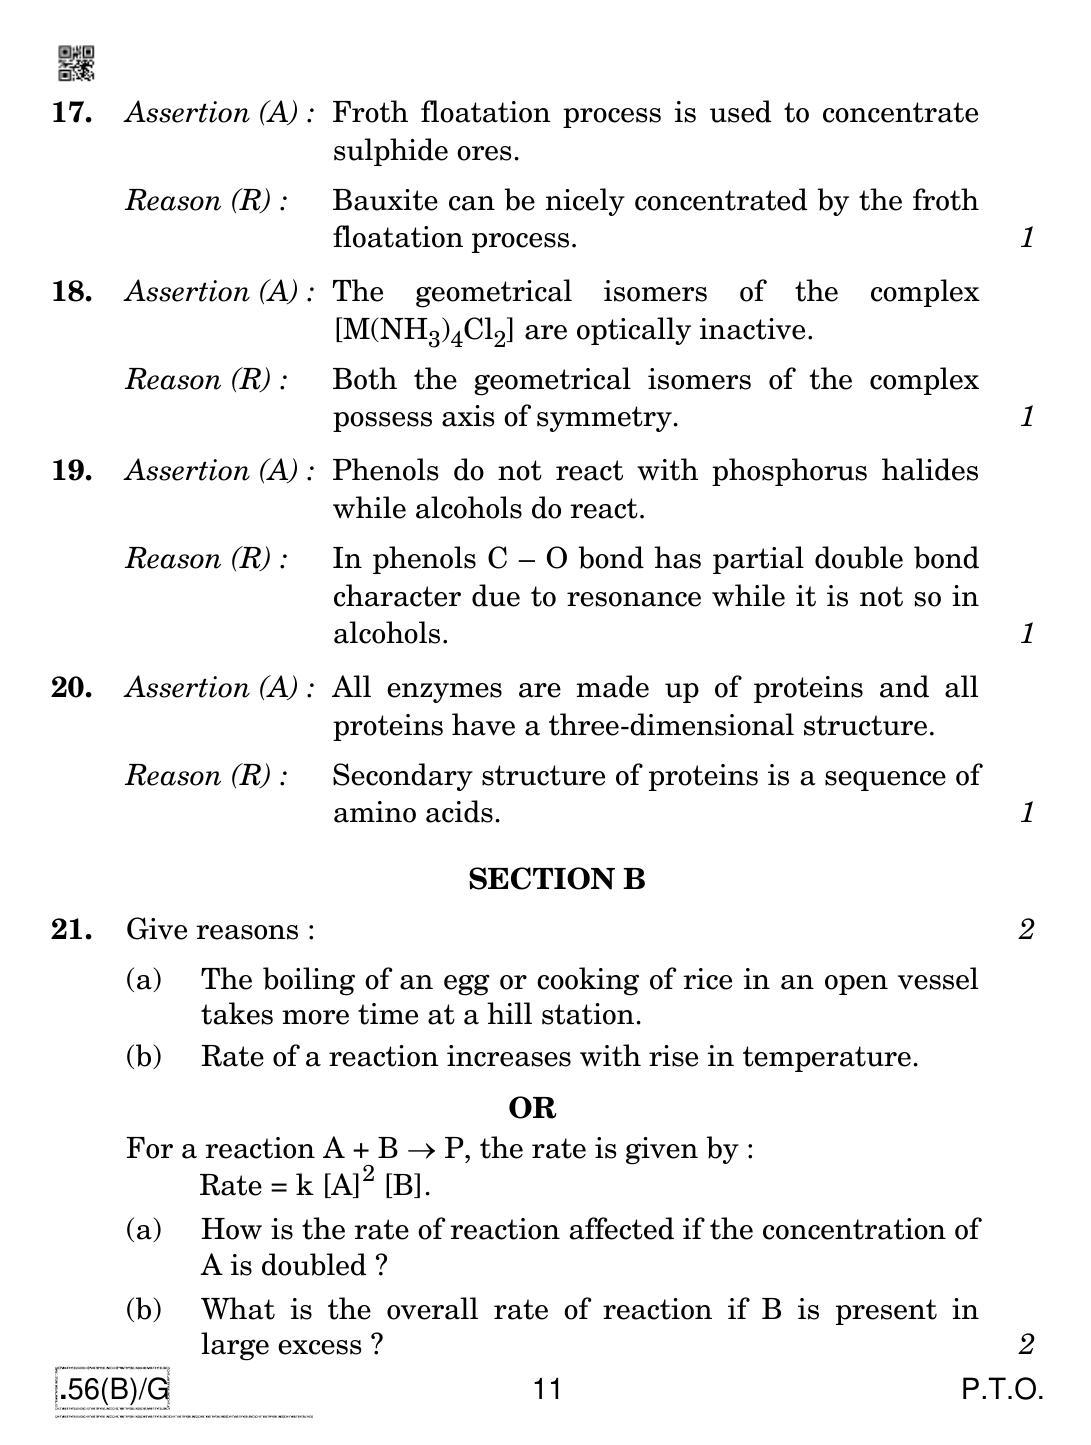 CBSE Class 12 56(B)-C - Chemistry For Blind Candidates 2020 Compartment Question Paper - Page 11